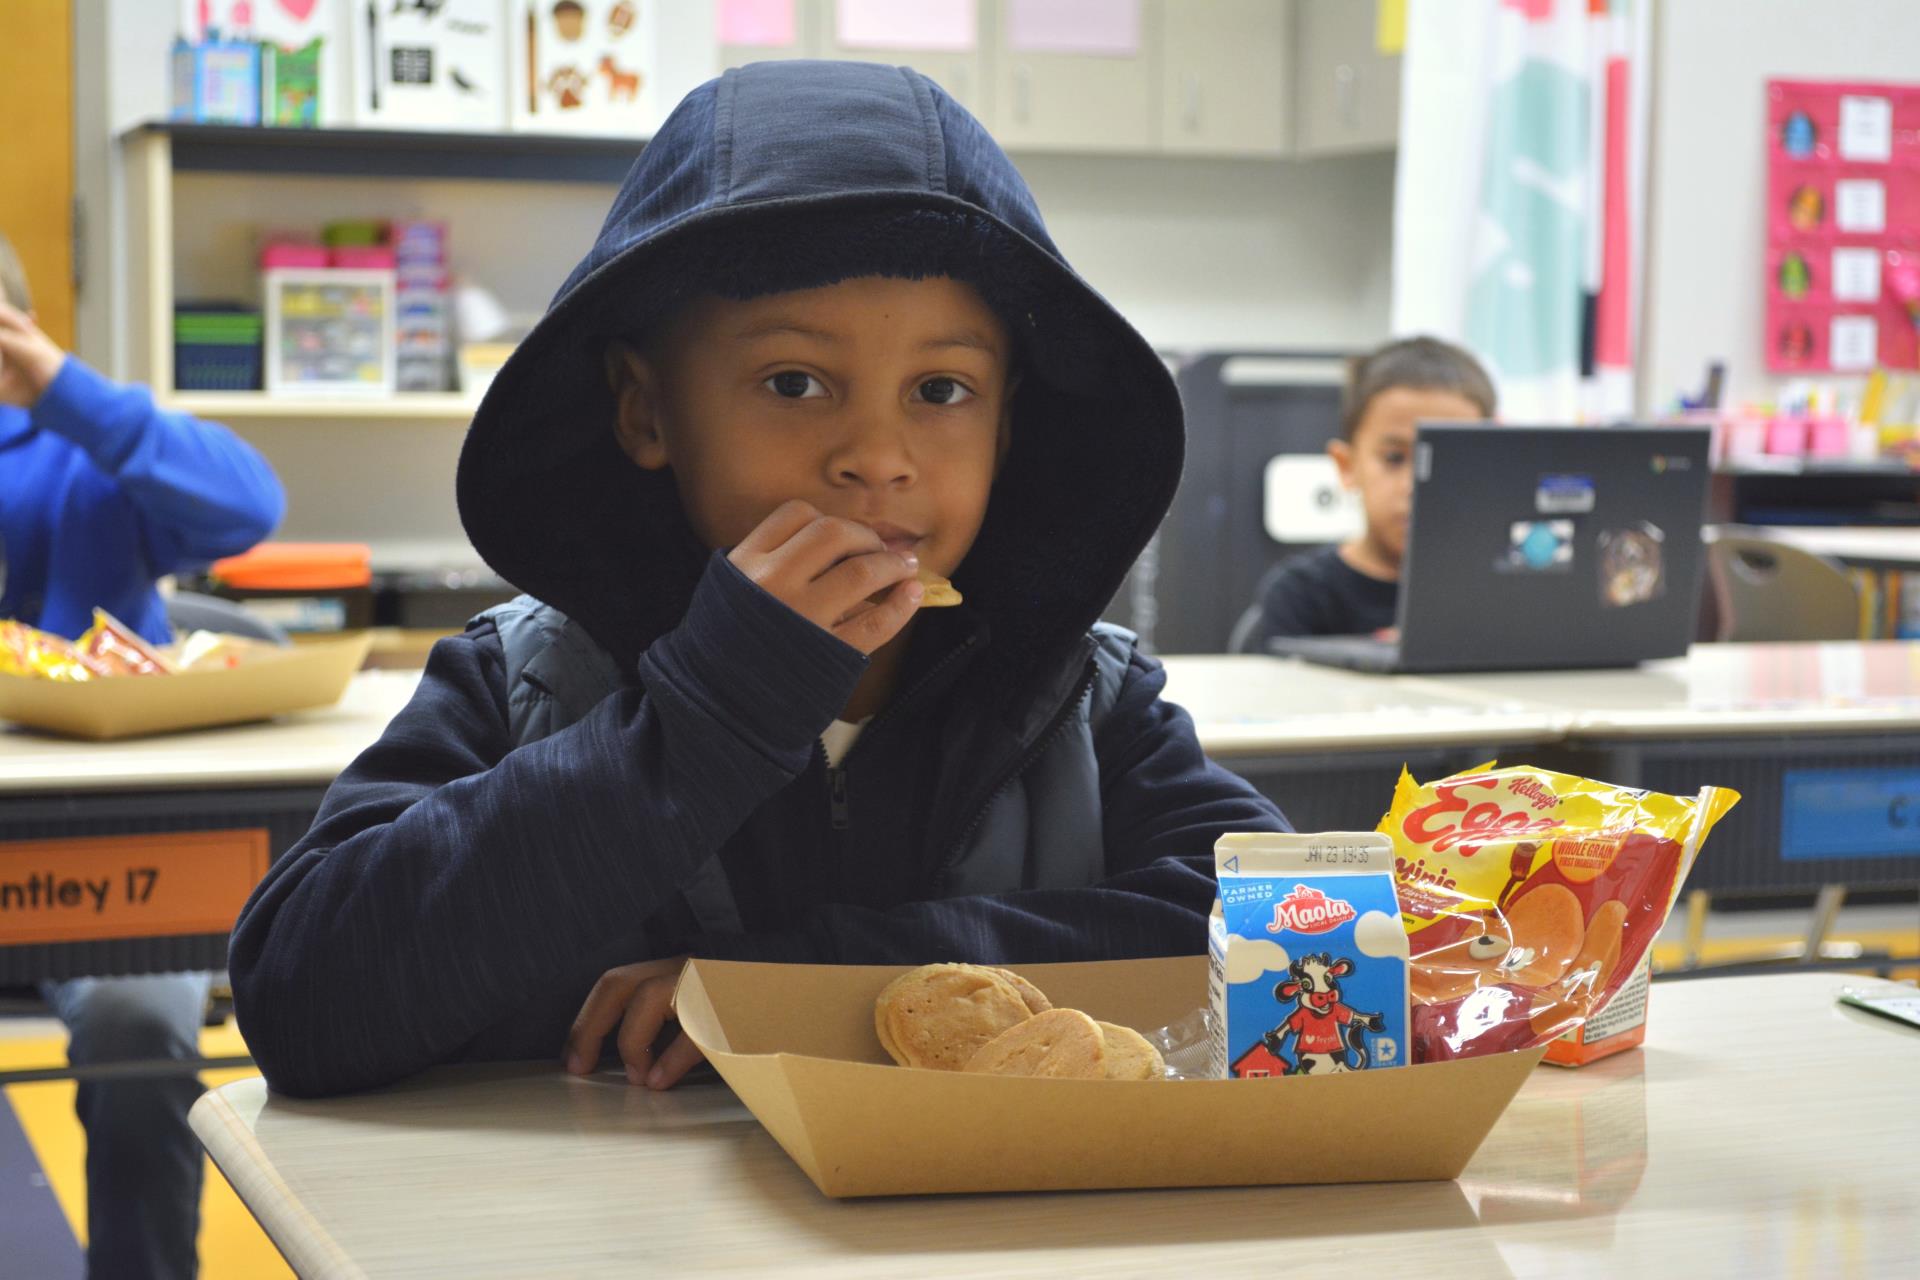 Student eating grab and go breakfast in the classroom.